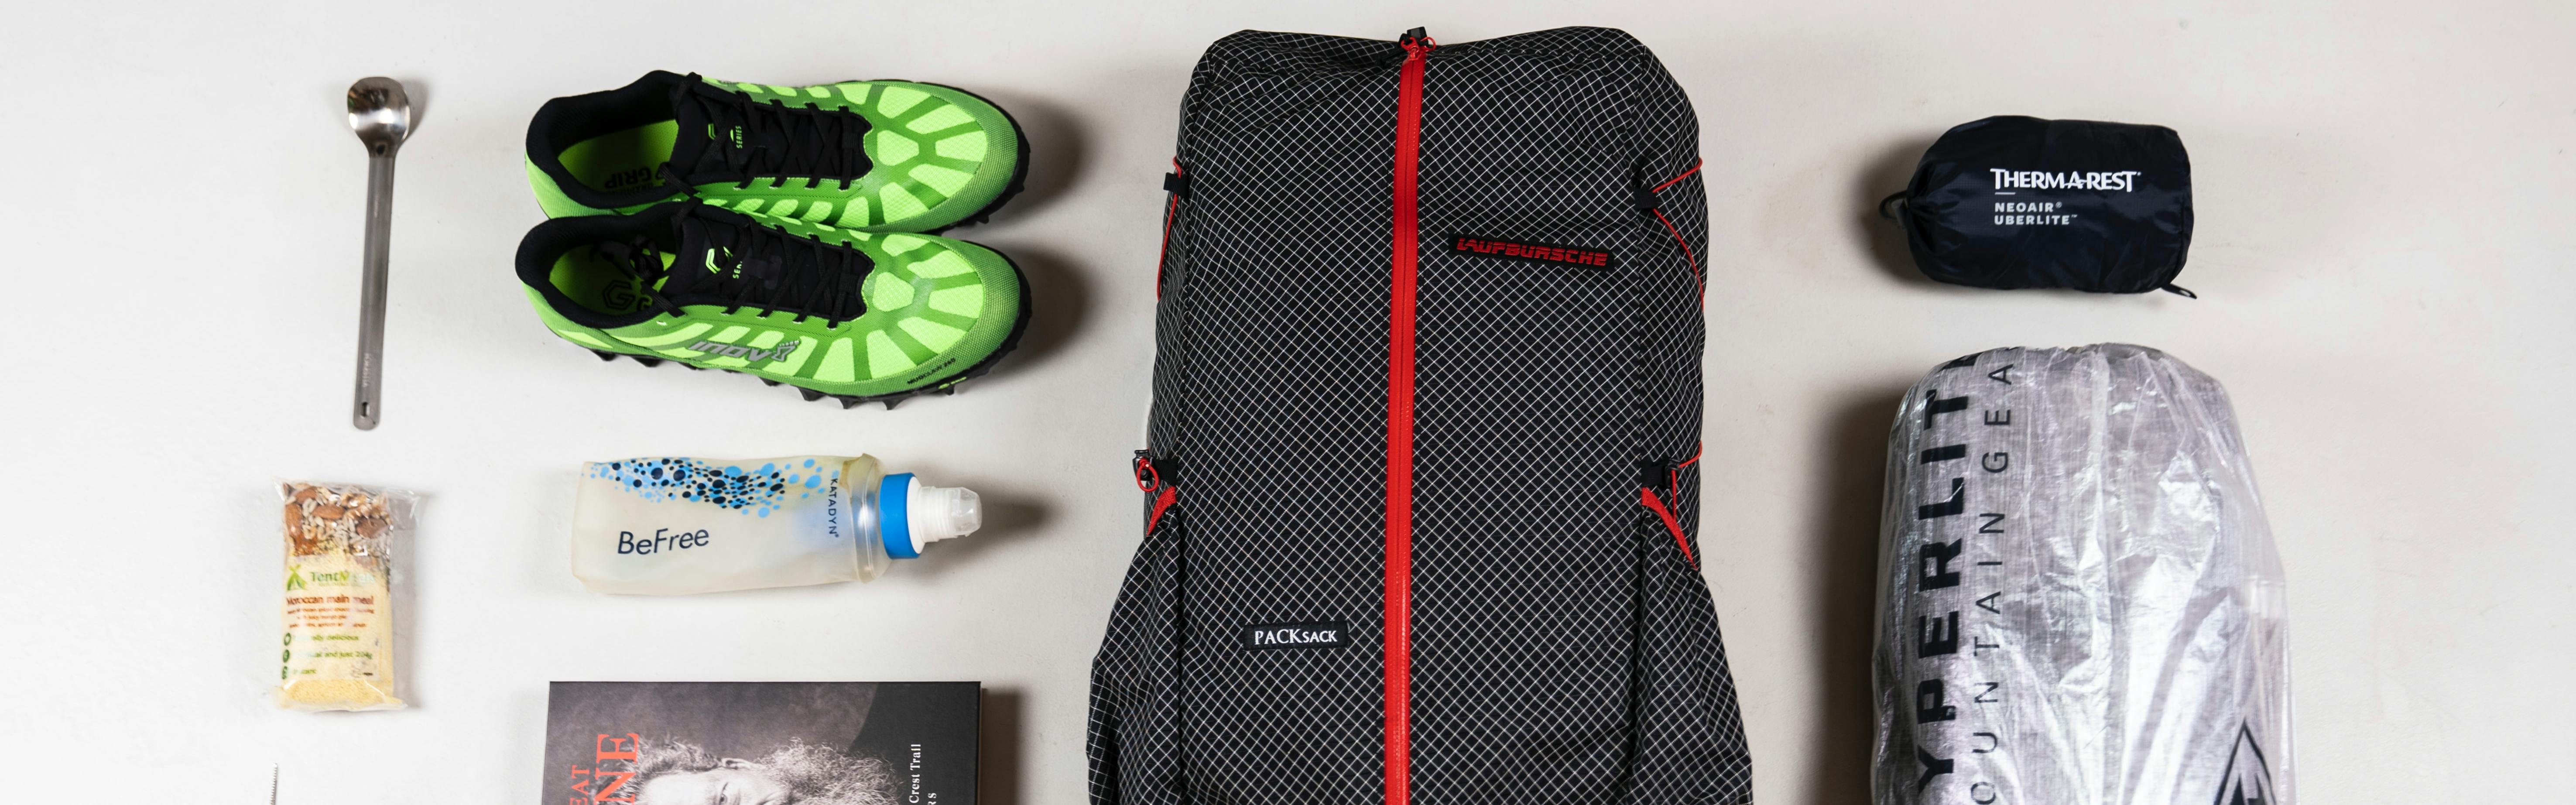 Camping gear for an ultralight camping trip